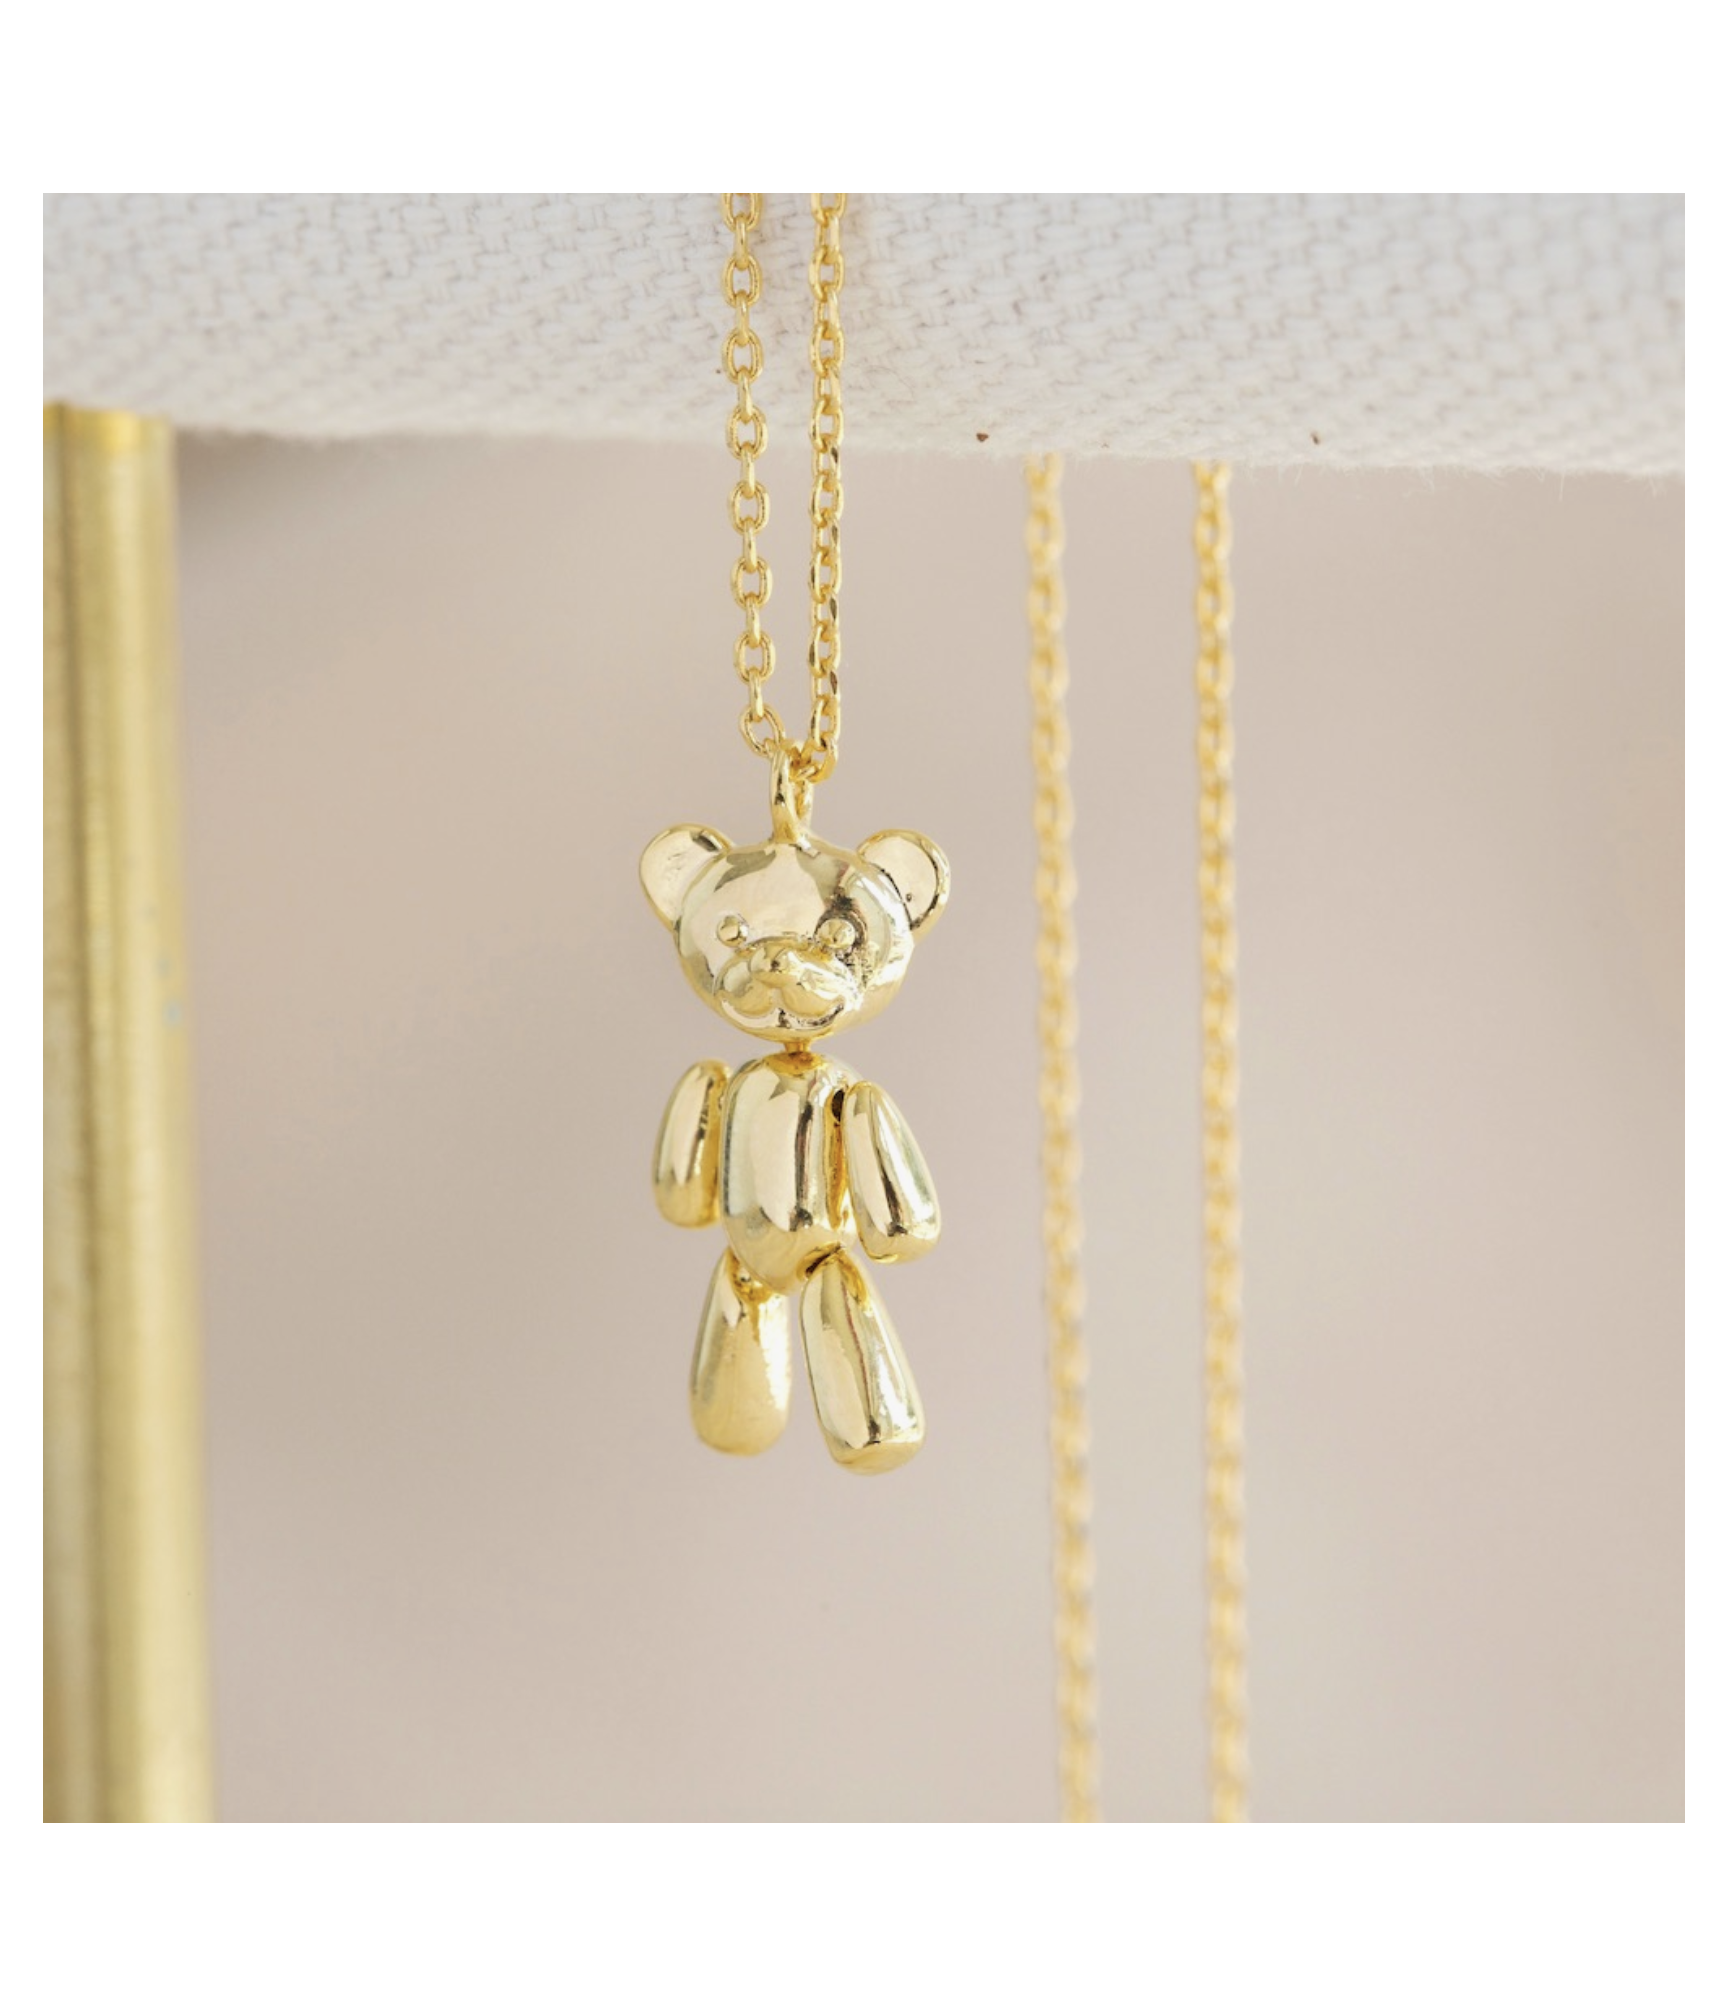 10K Yellow Gold Two Tone Teddy Bear XOXO Stampato Statement Set Necklace  18